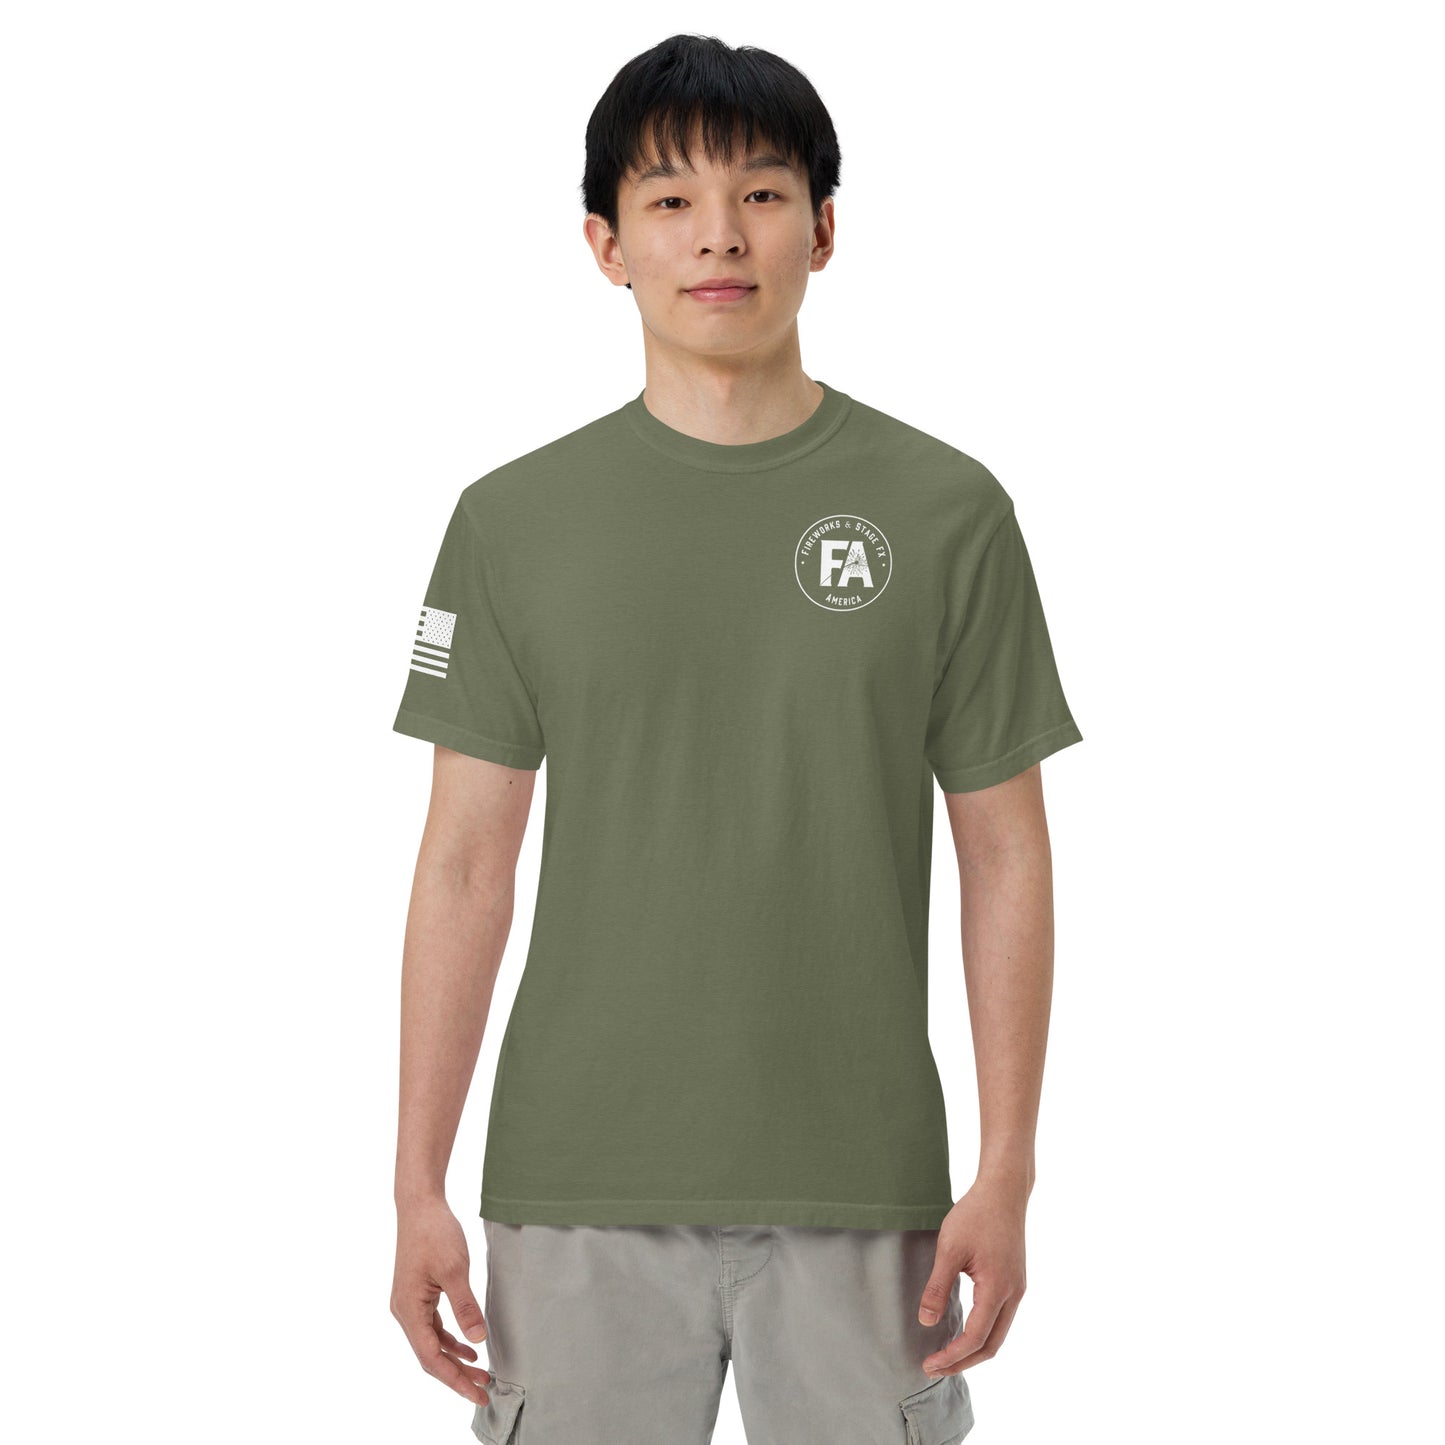 Unisex Military Support T-Shirt